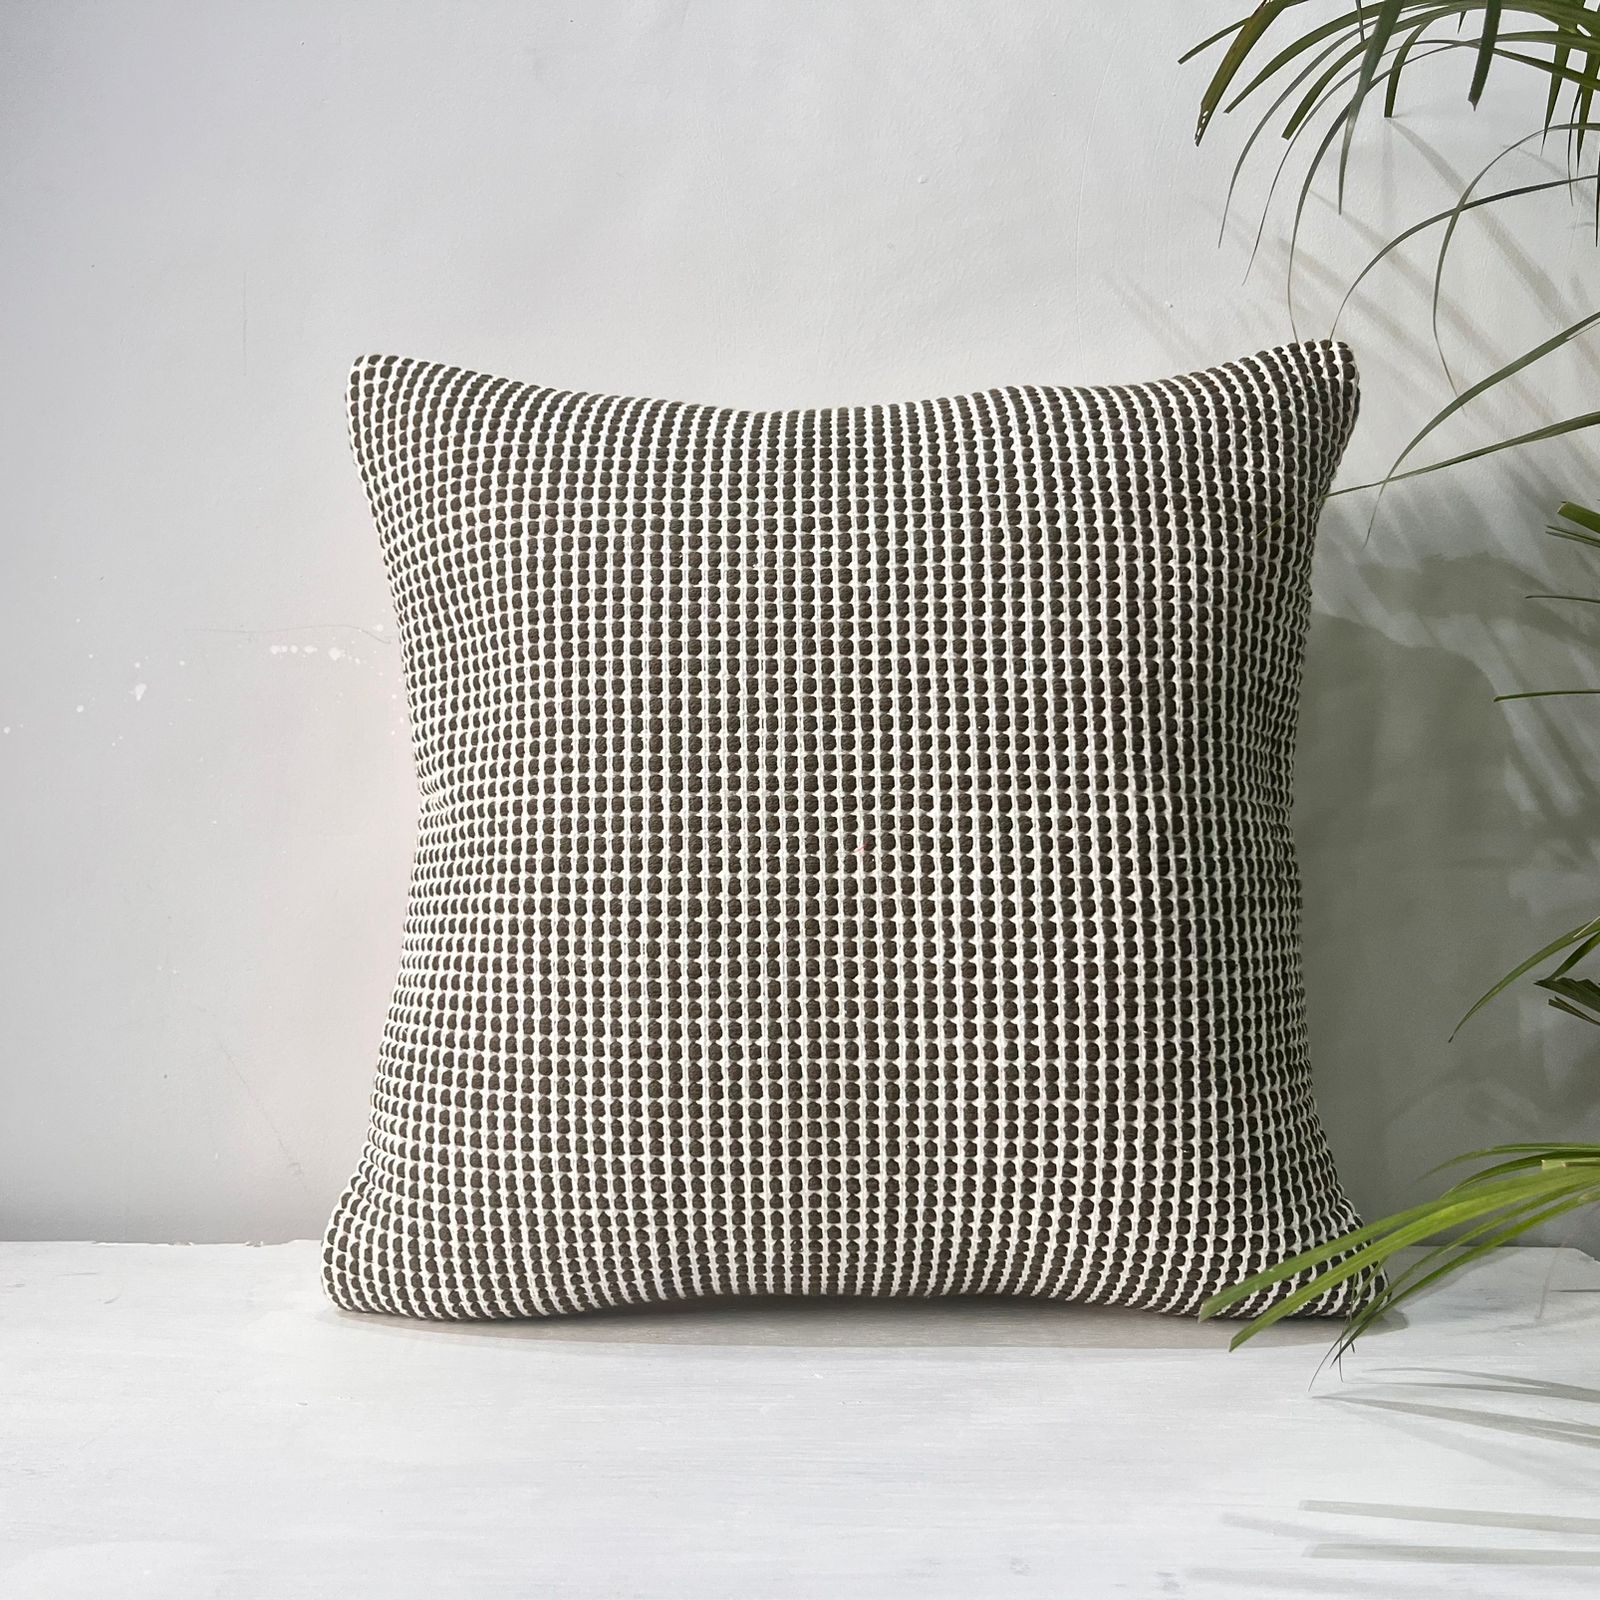 Cushion Cover with size of 45cm x 45cm (18" x 18")